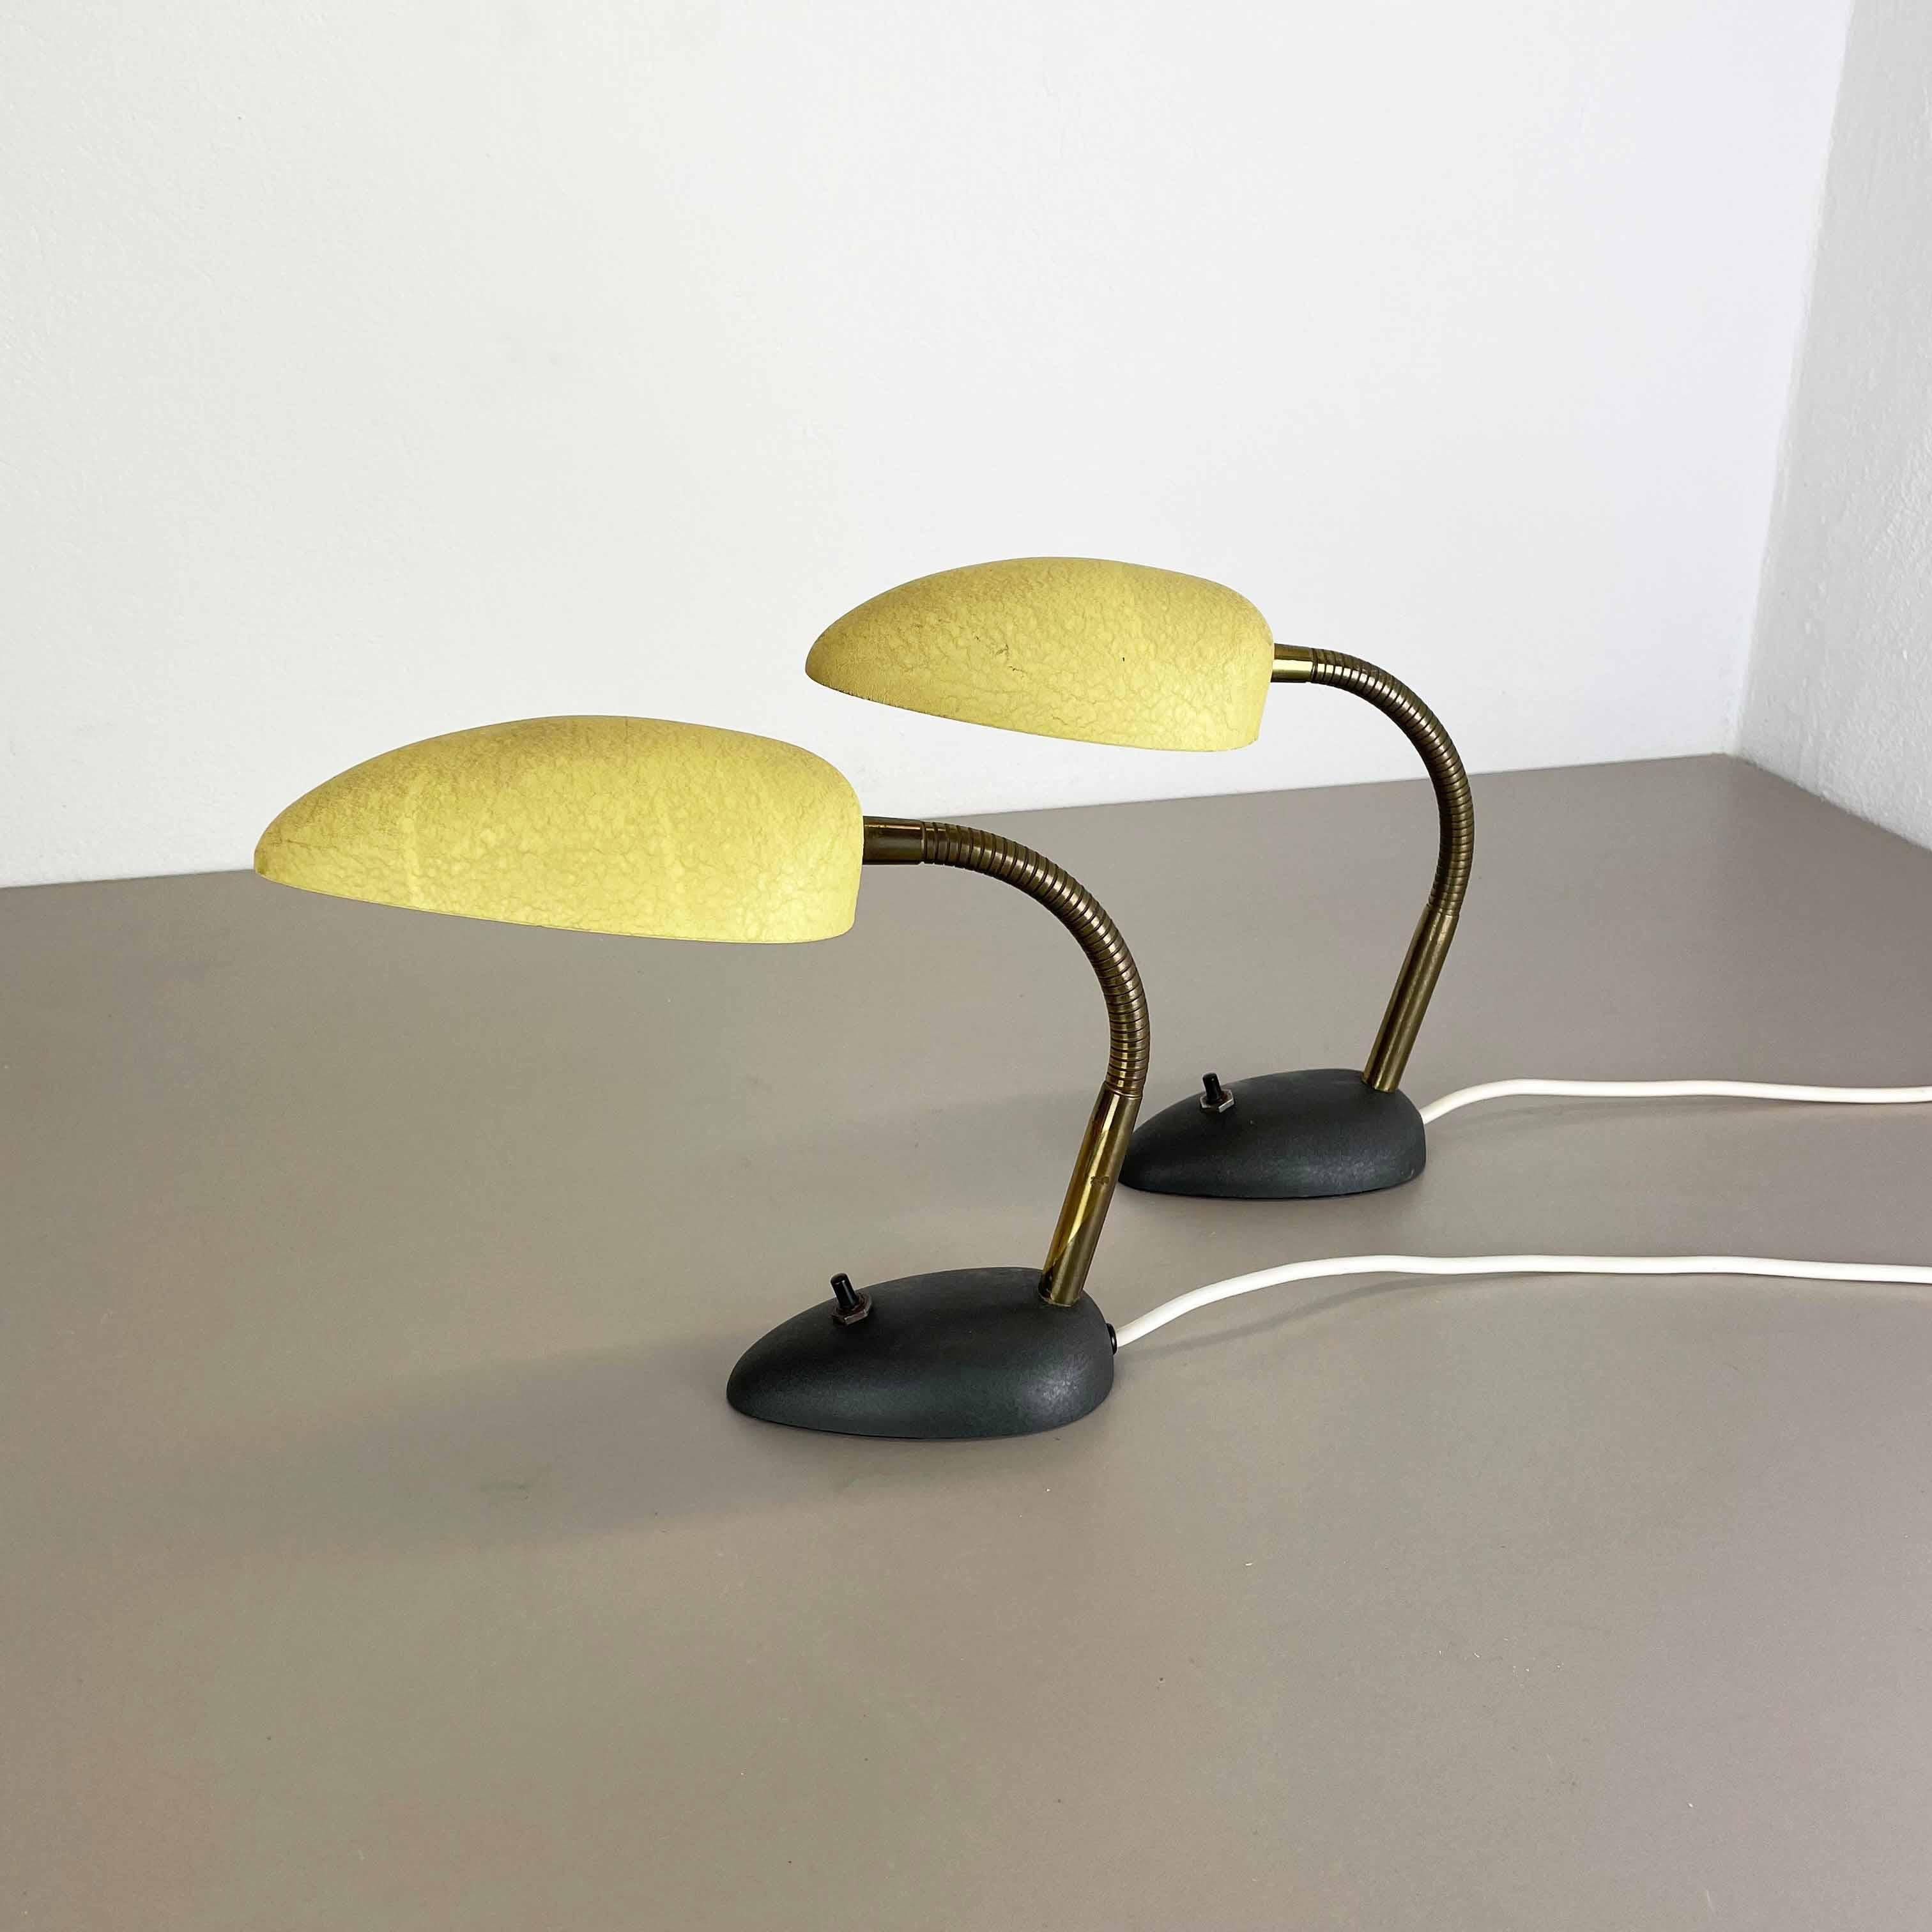 Article:

Modernist brass table light set of 2


Origin:

Italy


Decade:

1950s





This original vintage light set was designed and produced in the 1950s in Italy. The light is made of metal with a shade in yellow and stand base